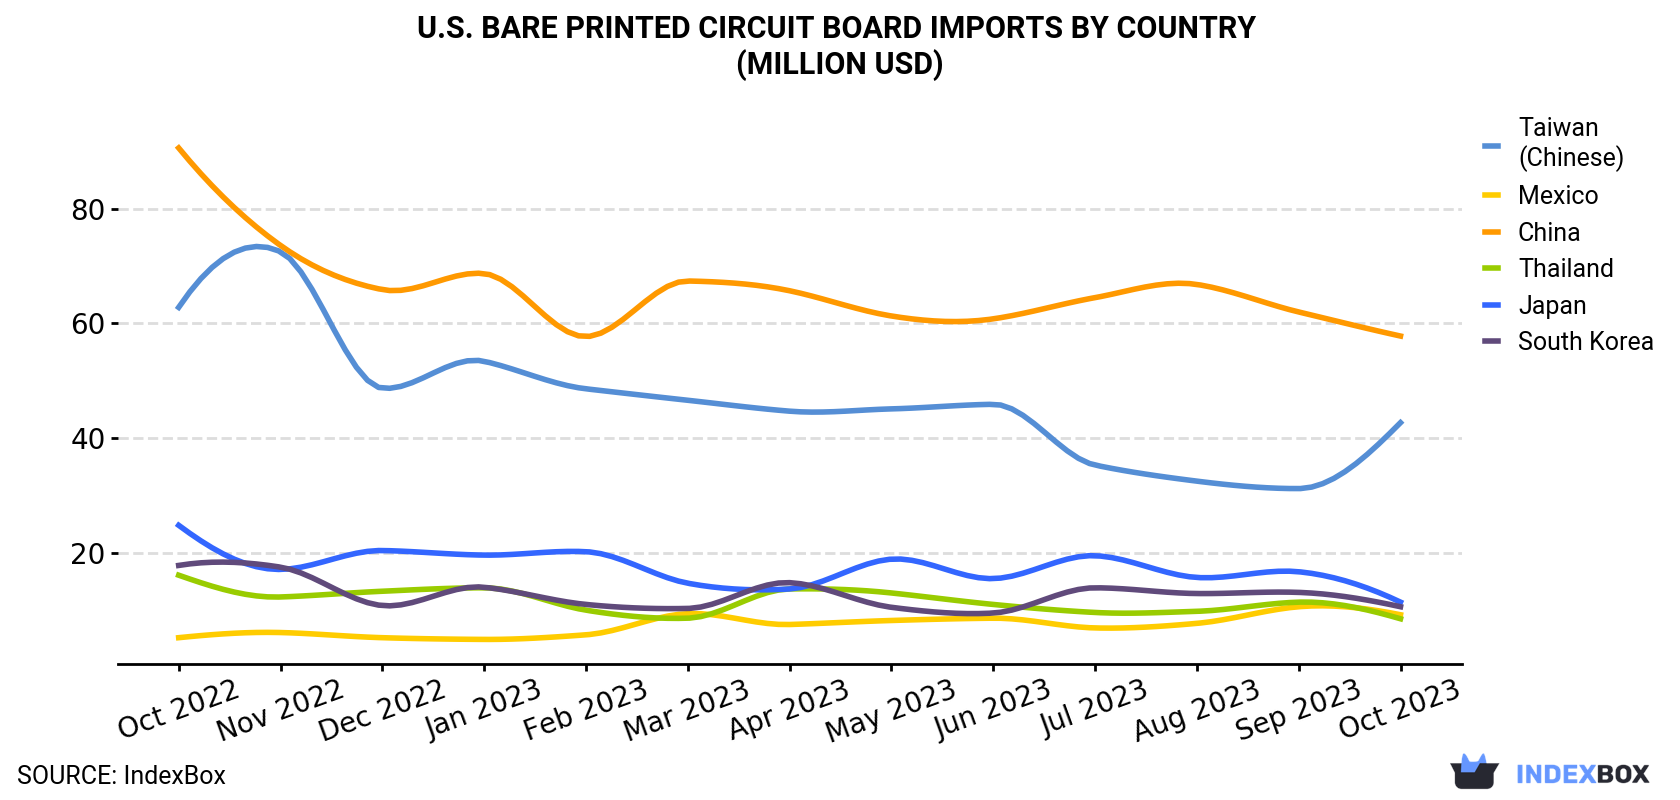 U.S. Bare Printed Circuit Board Imports By Country (Million USD)